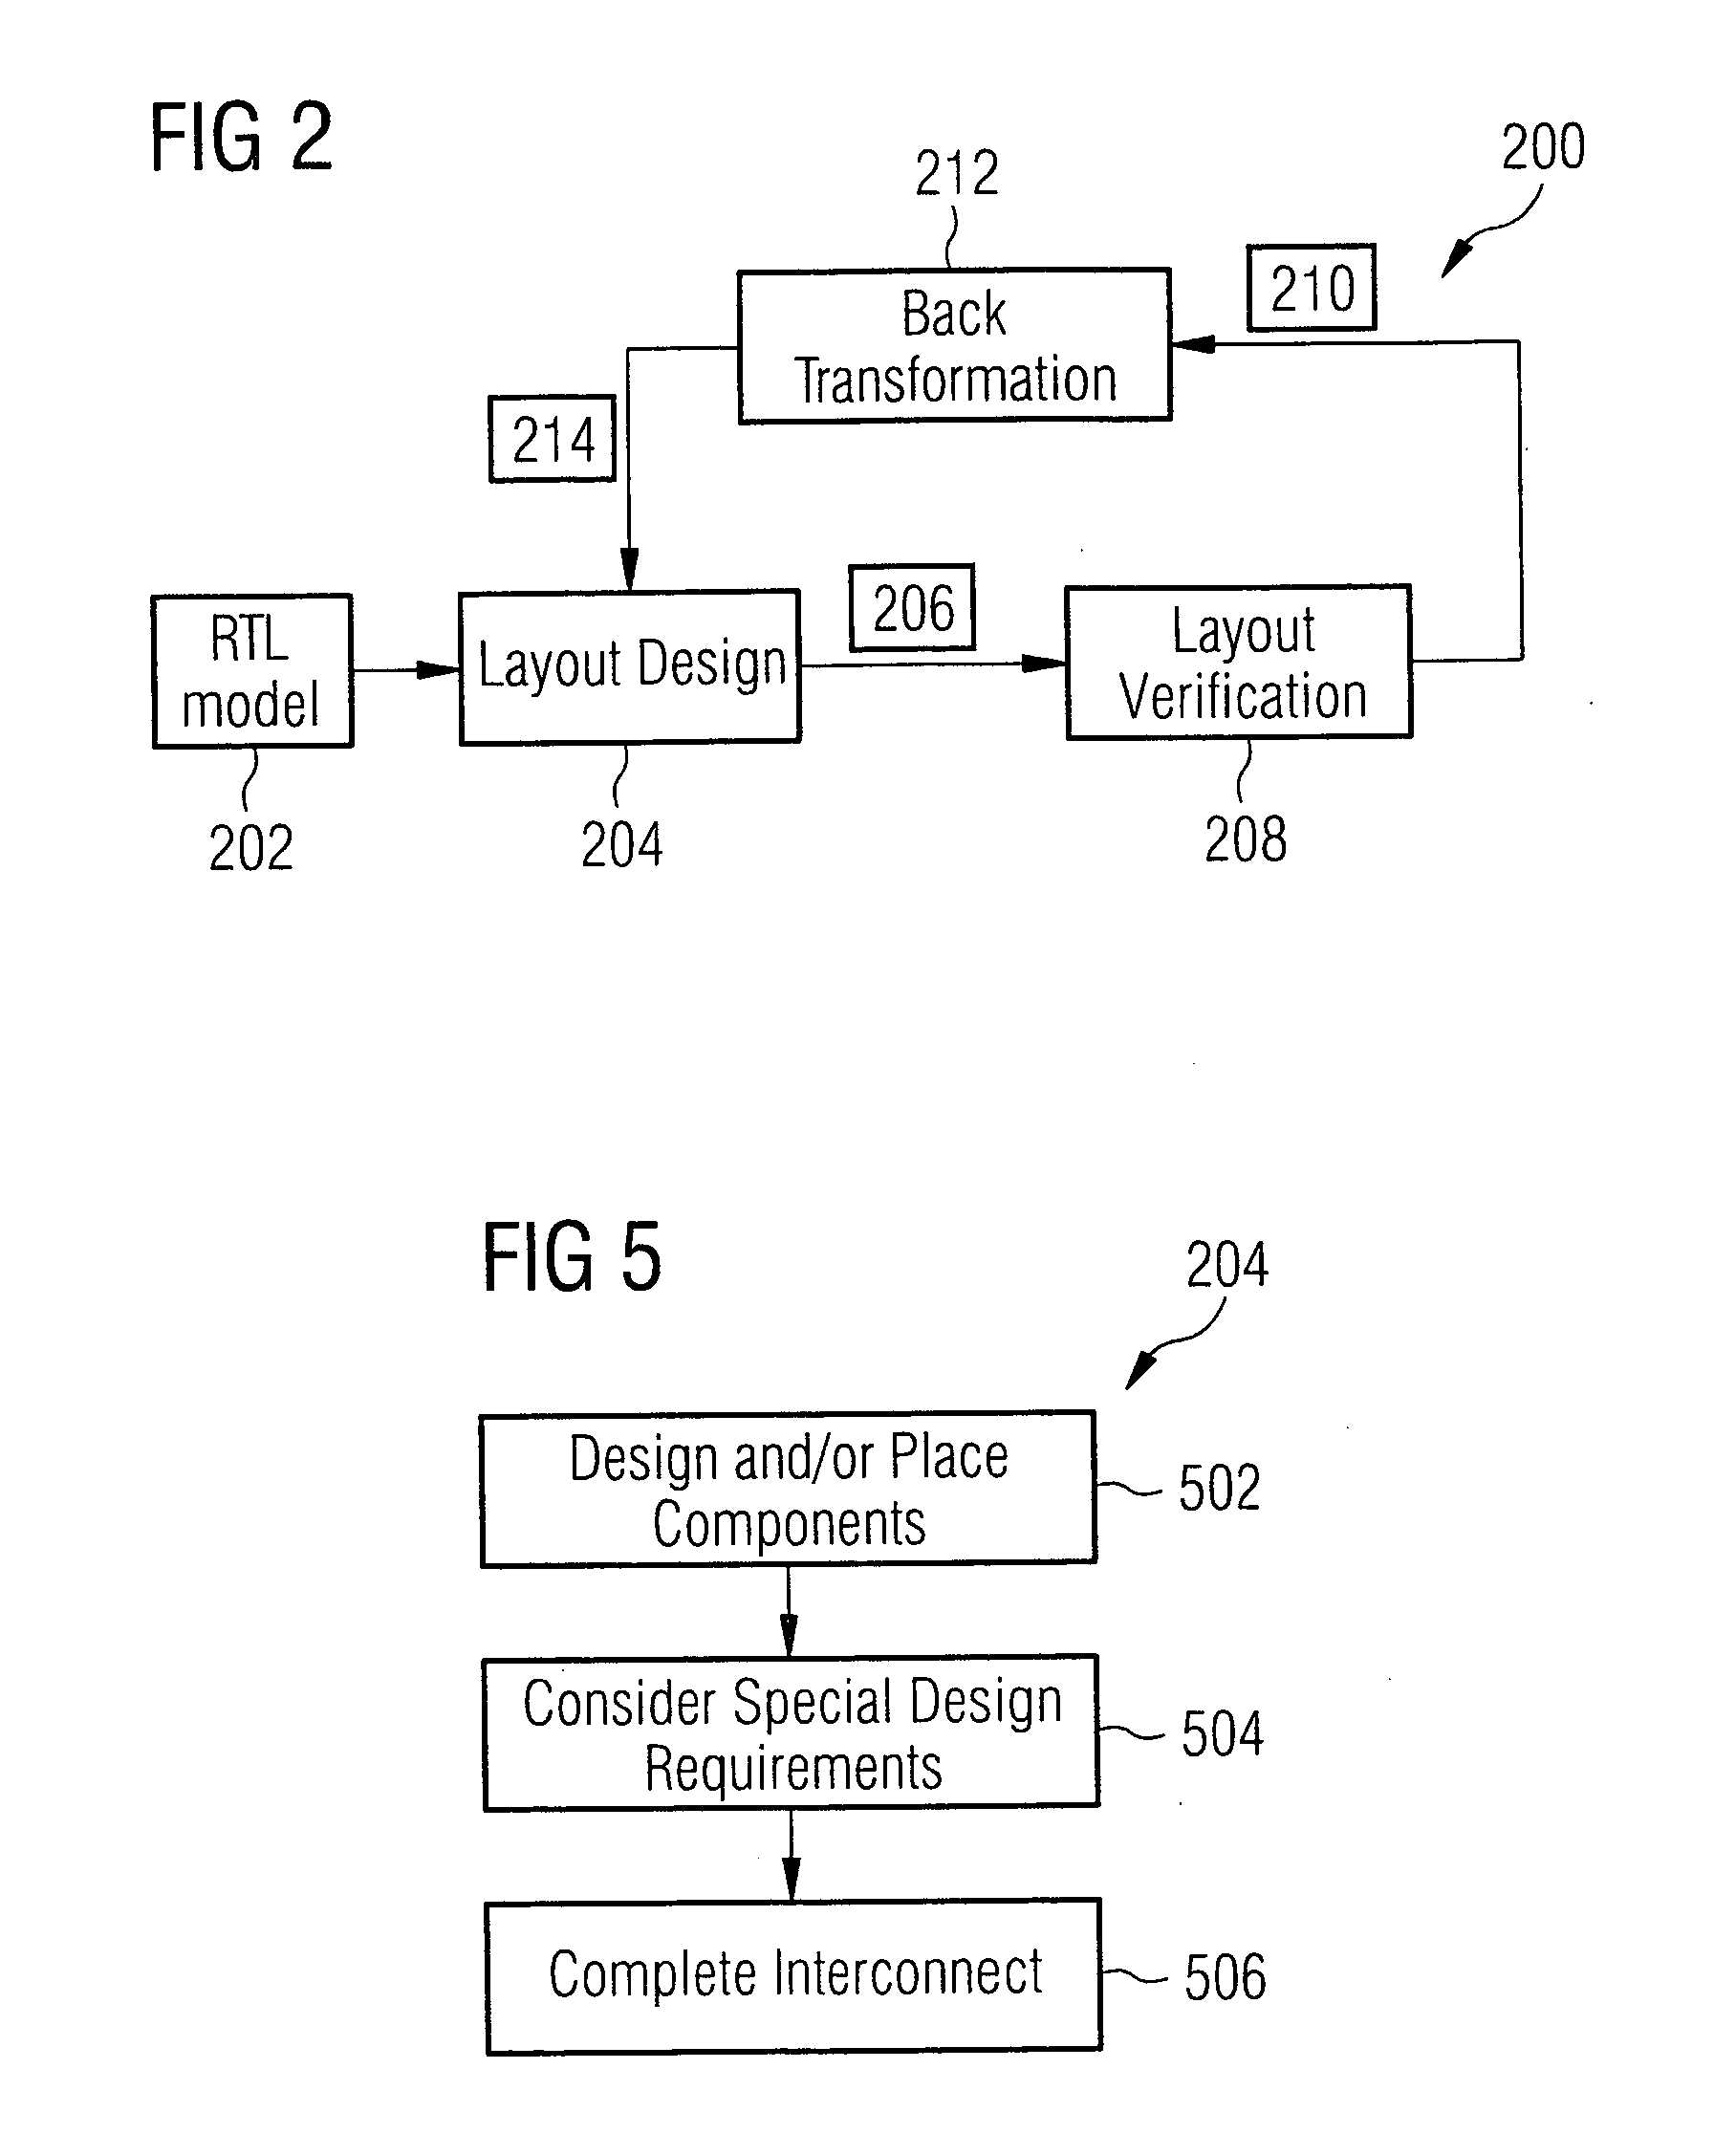 Layout cells, layout cell arrangement, method of generating a layout cell, method of generating a layout cell arrangement, computer program products